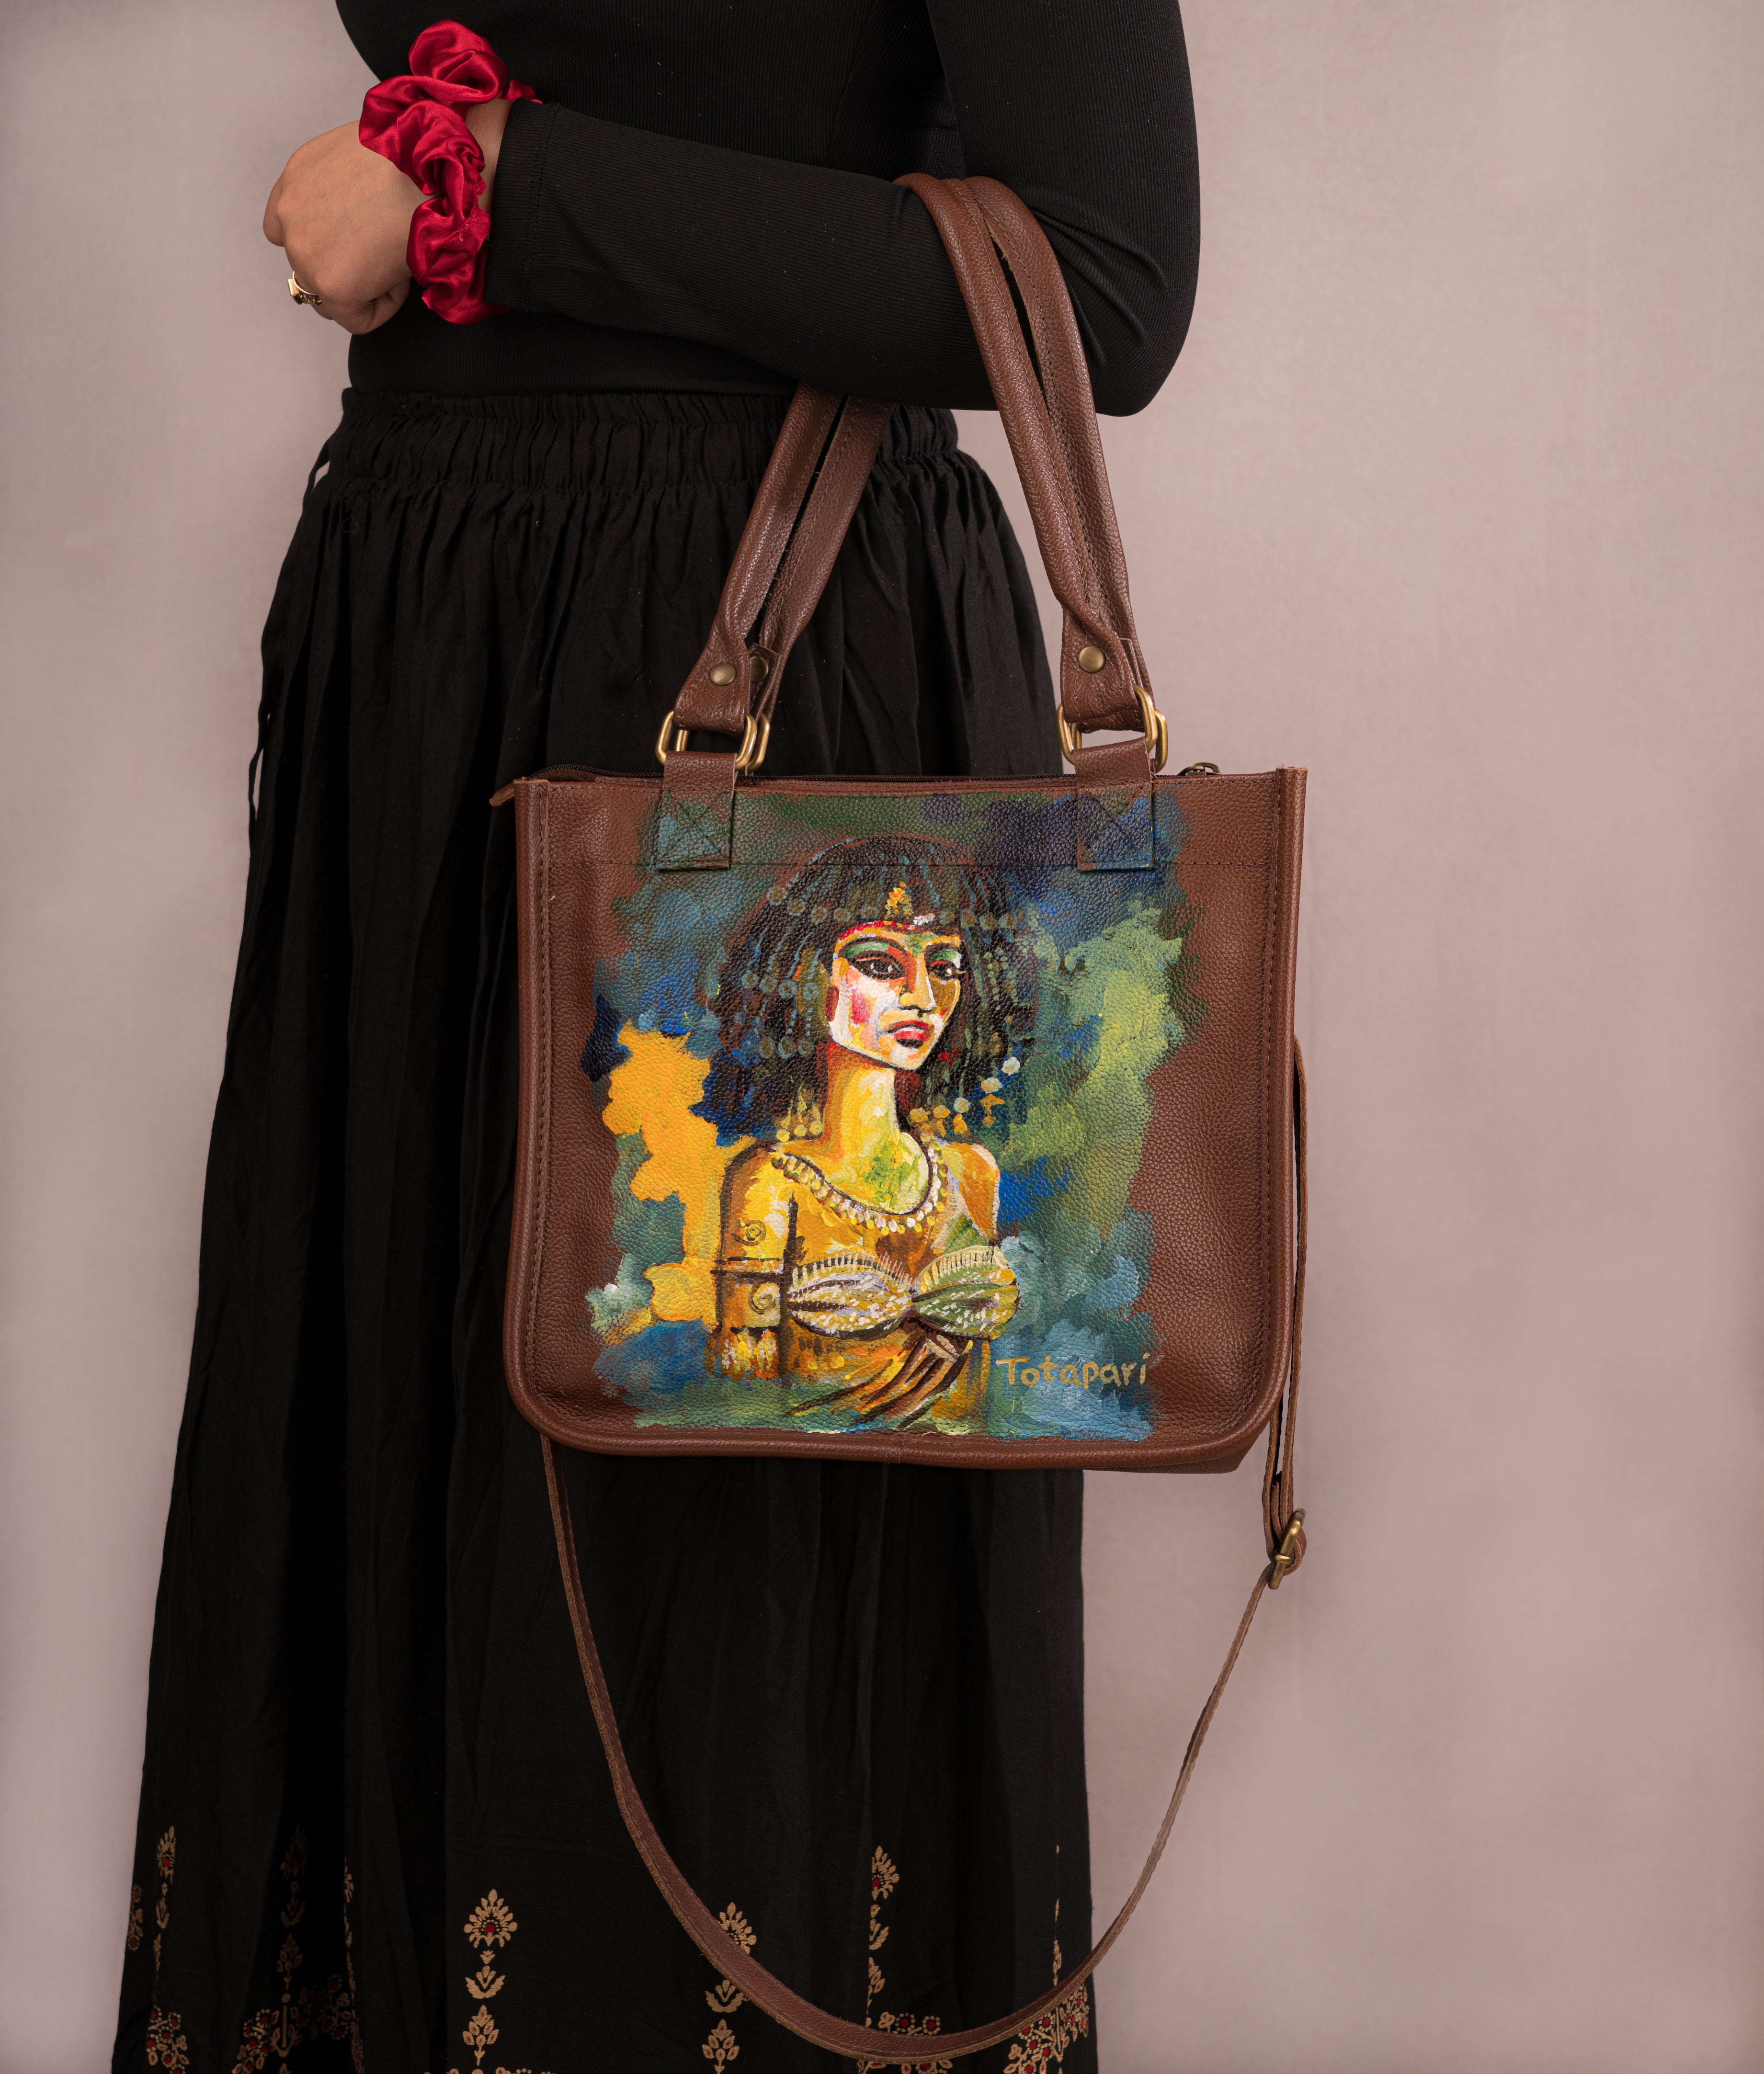 Annie Oakley Bag in Vintage Tribe Leather | Online Exclusive… | Flickr